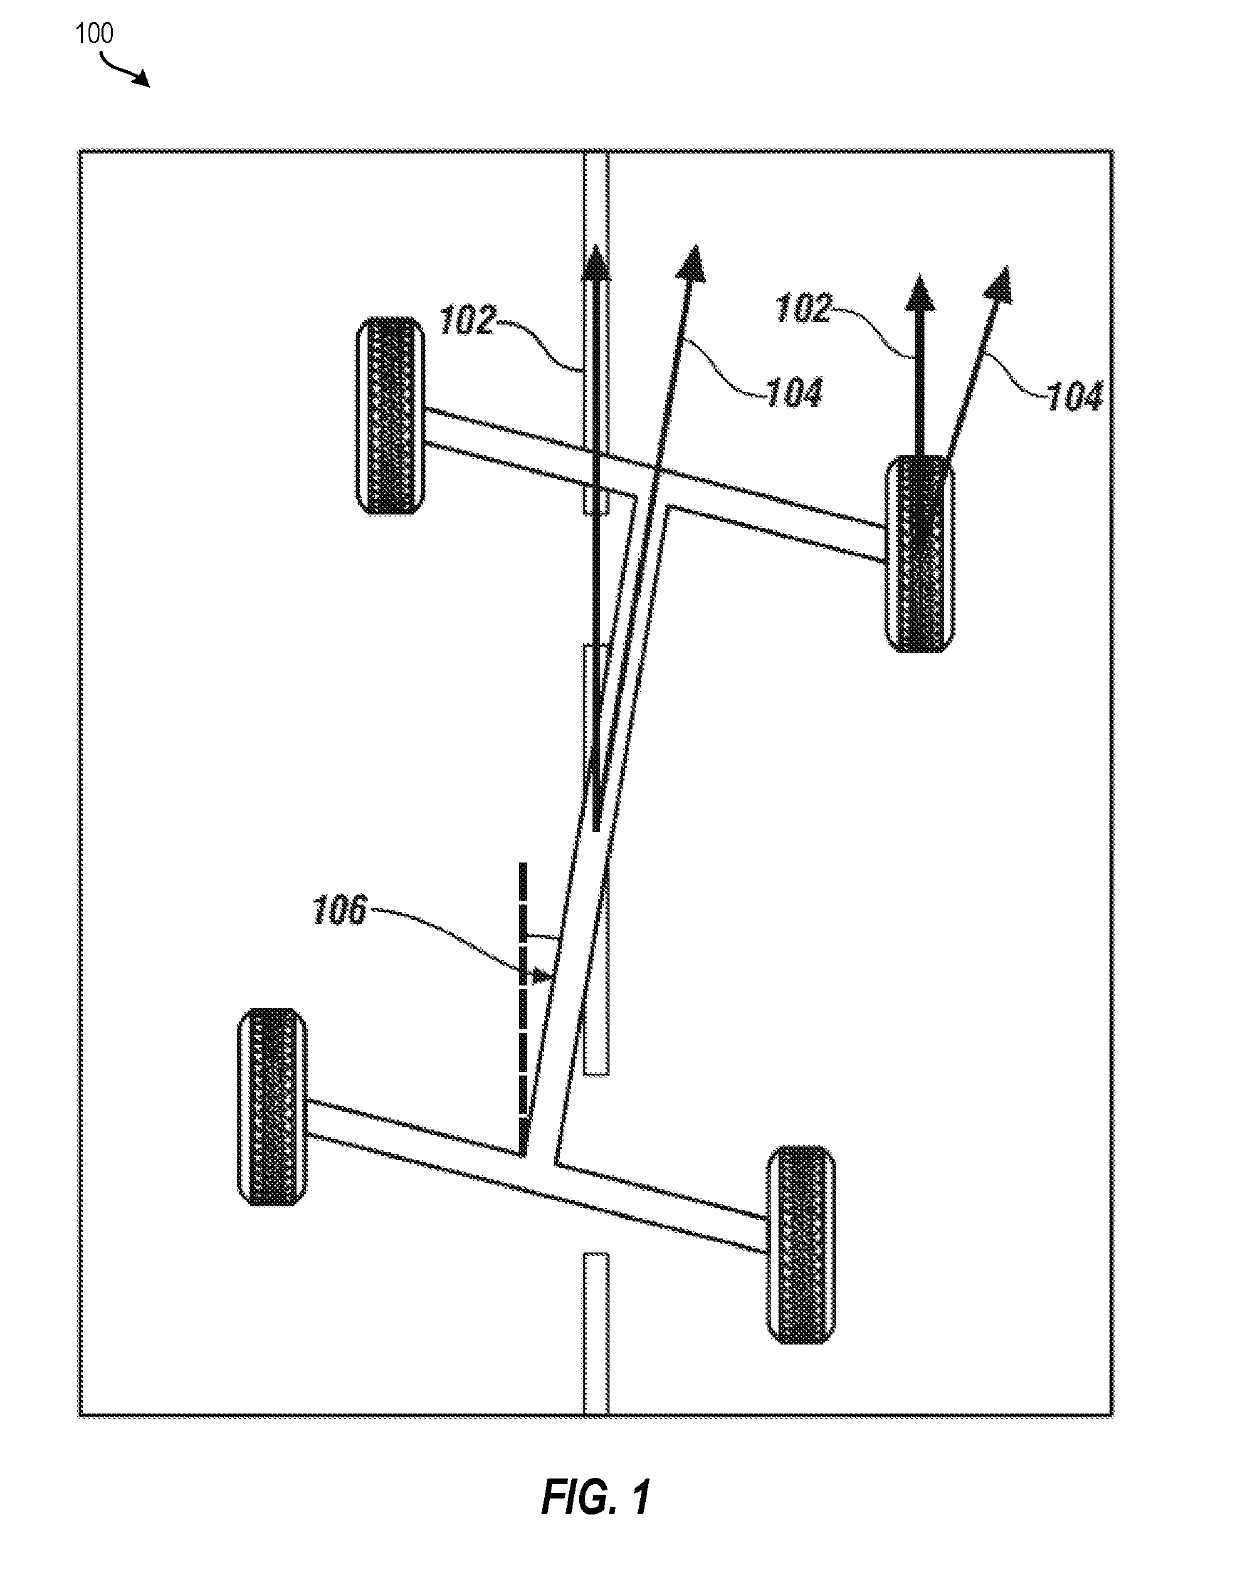 Vehicle suspension system alignment monitoring